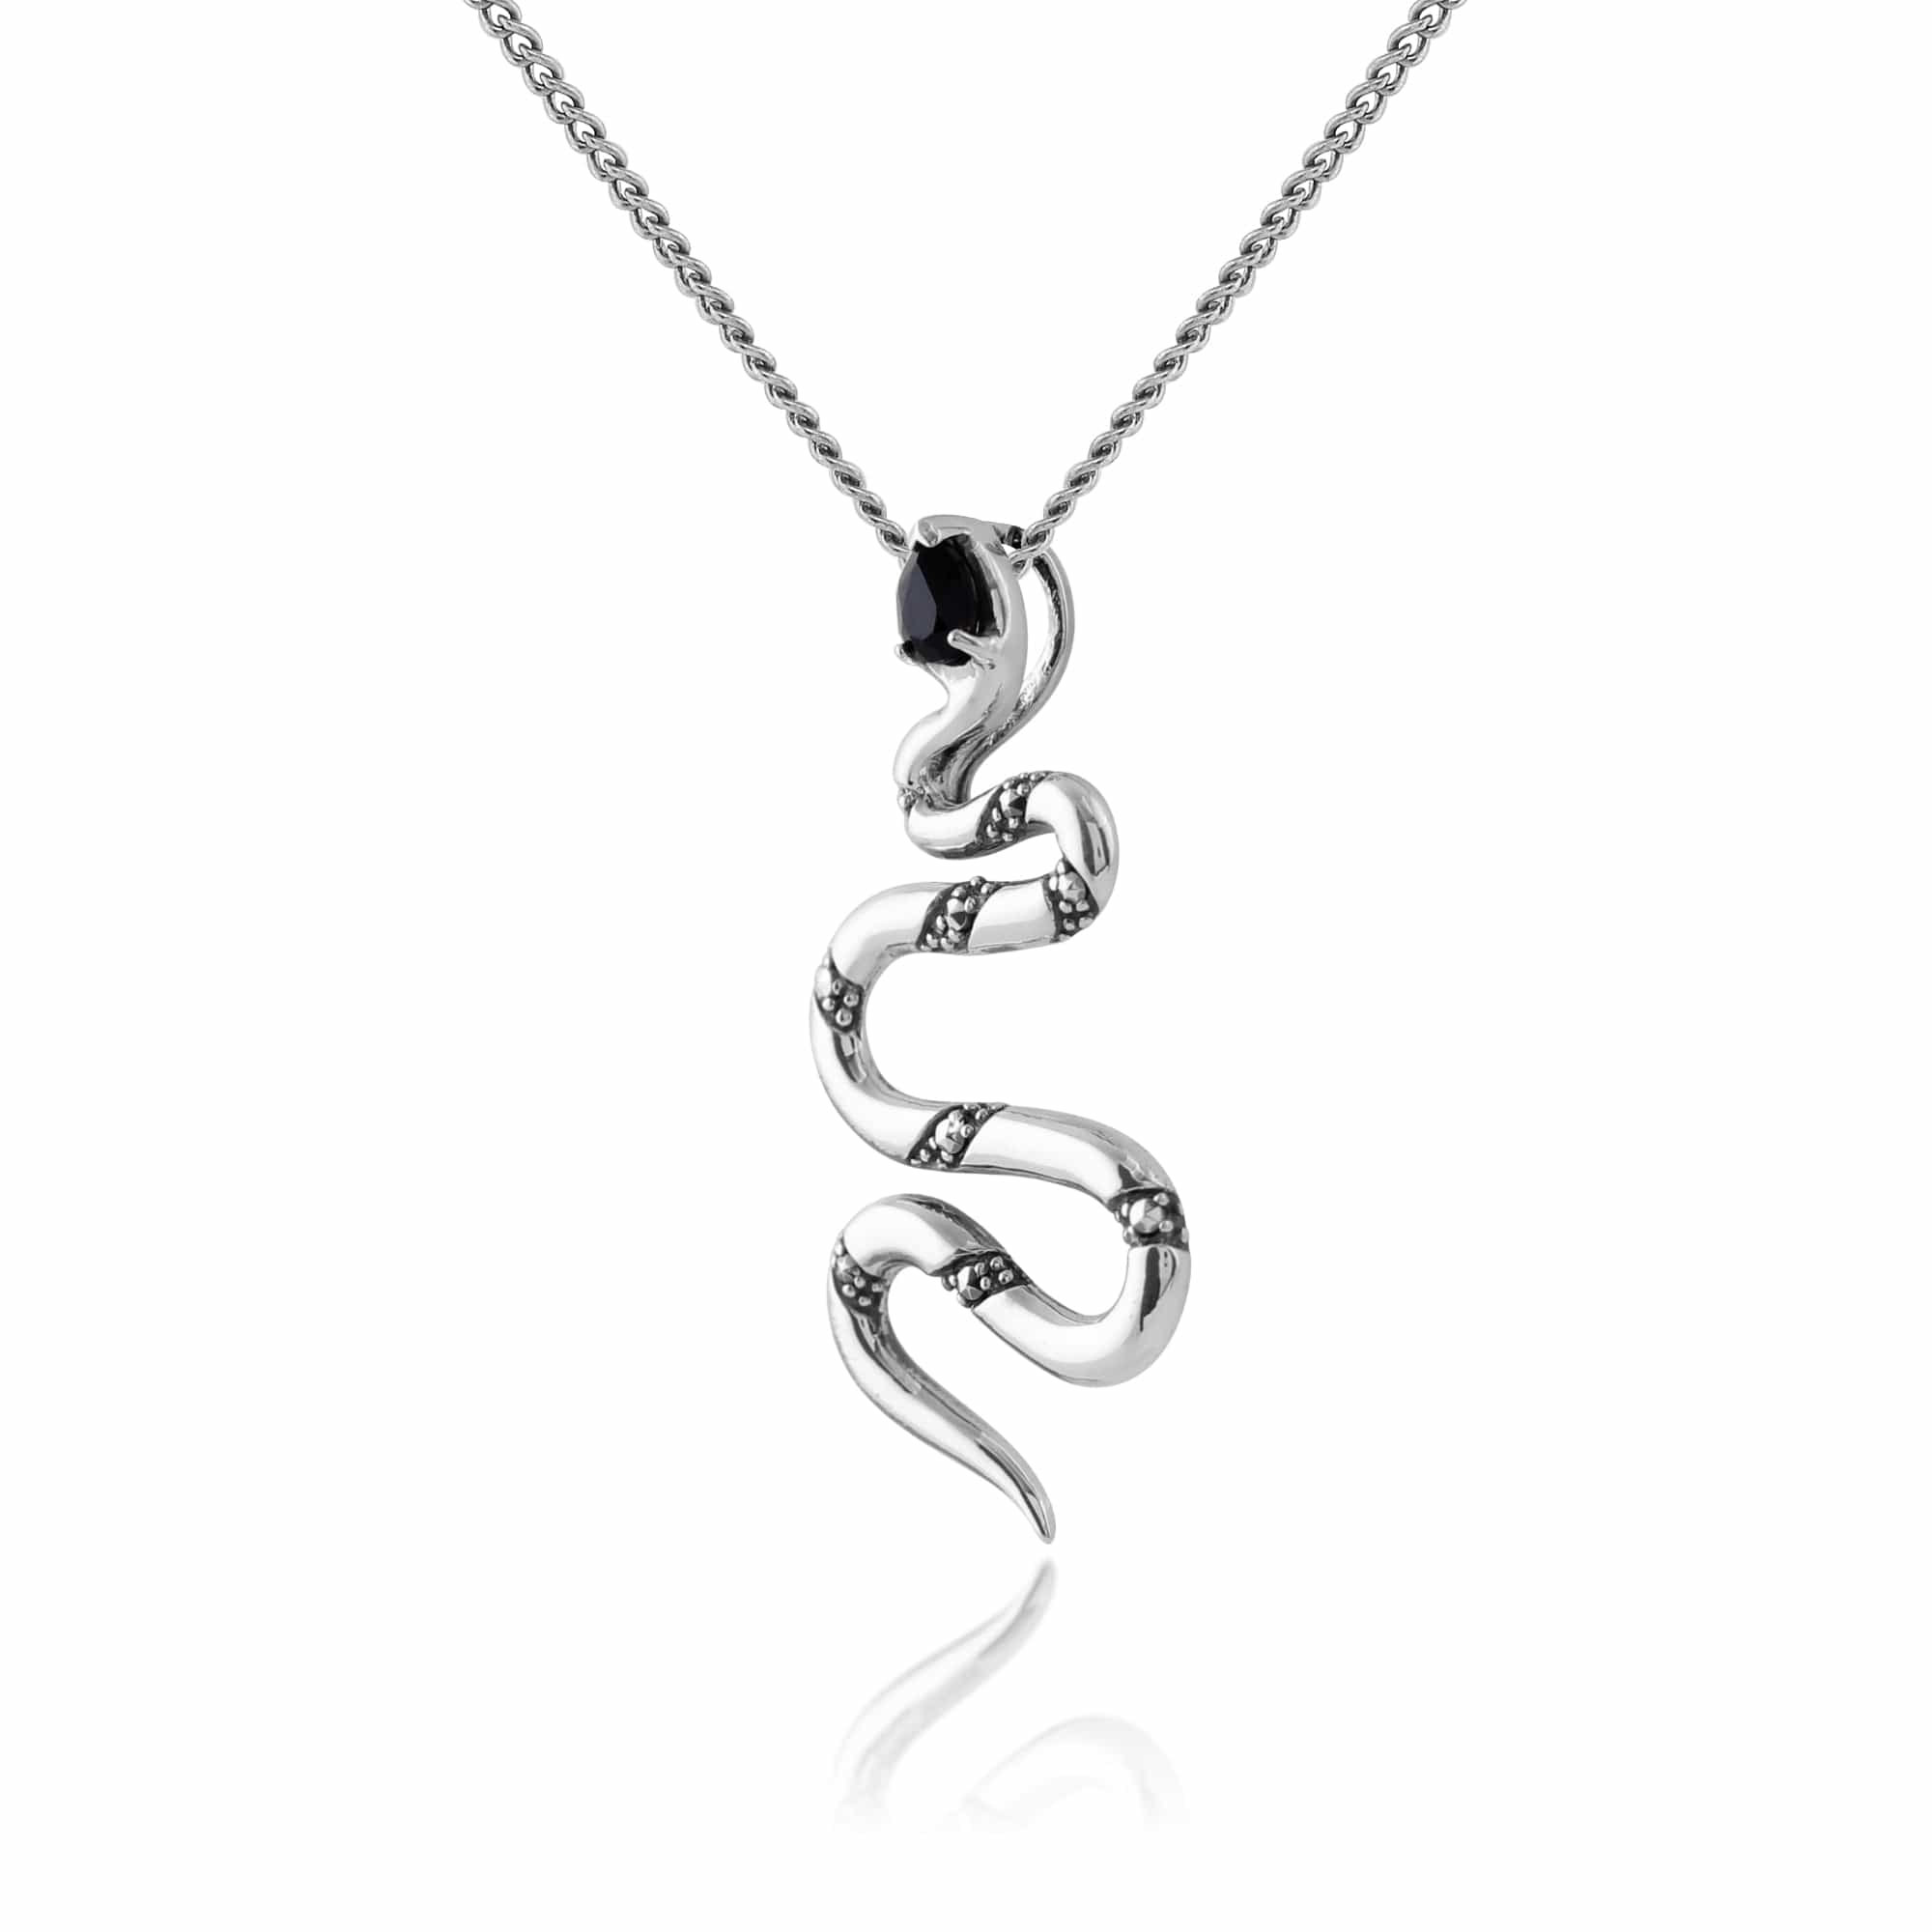 214N661401925 Art Deco Style Pear Black Spinel & Marcasite Snake Necklace in 925 Sterling Silver 2